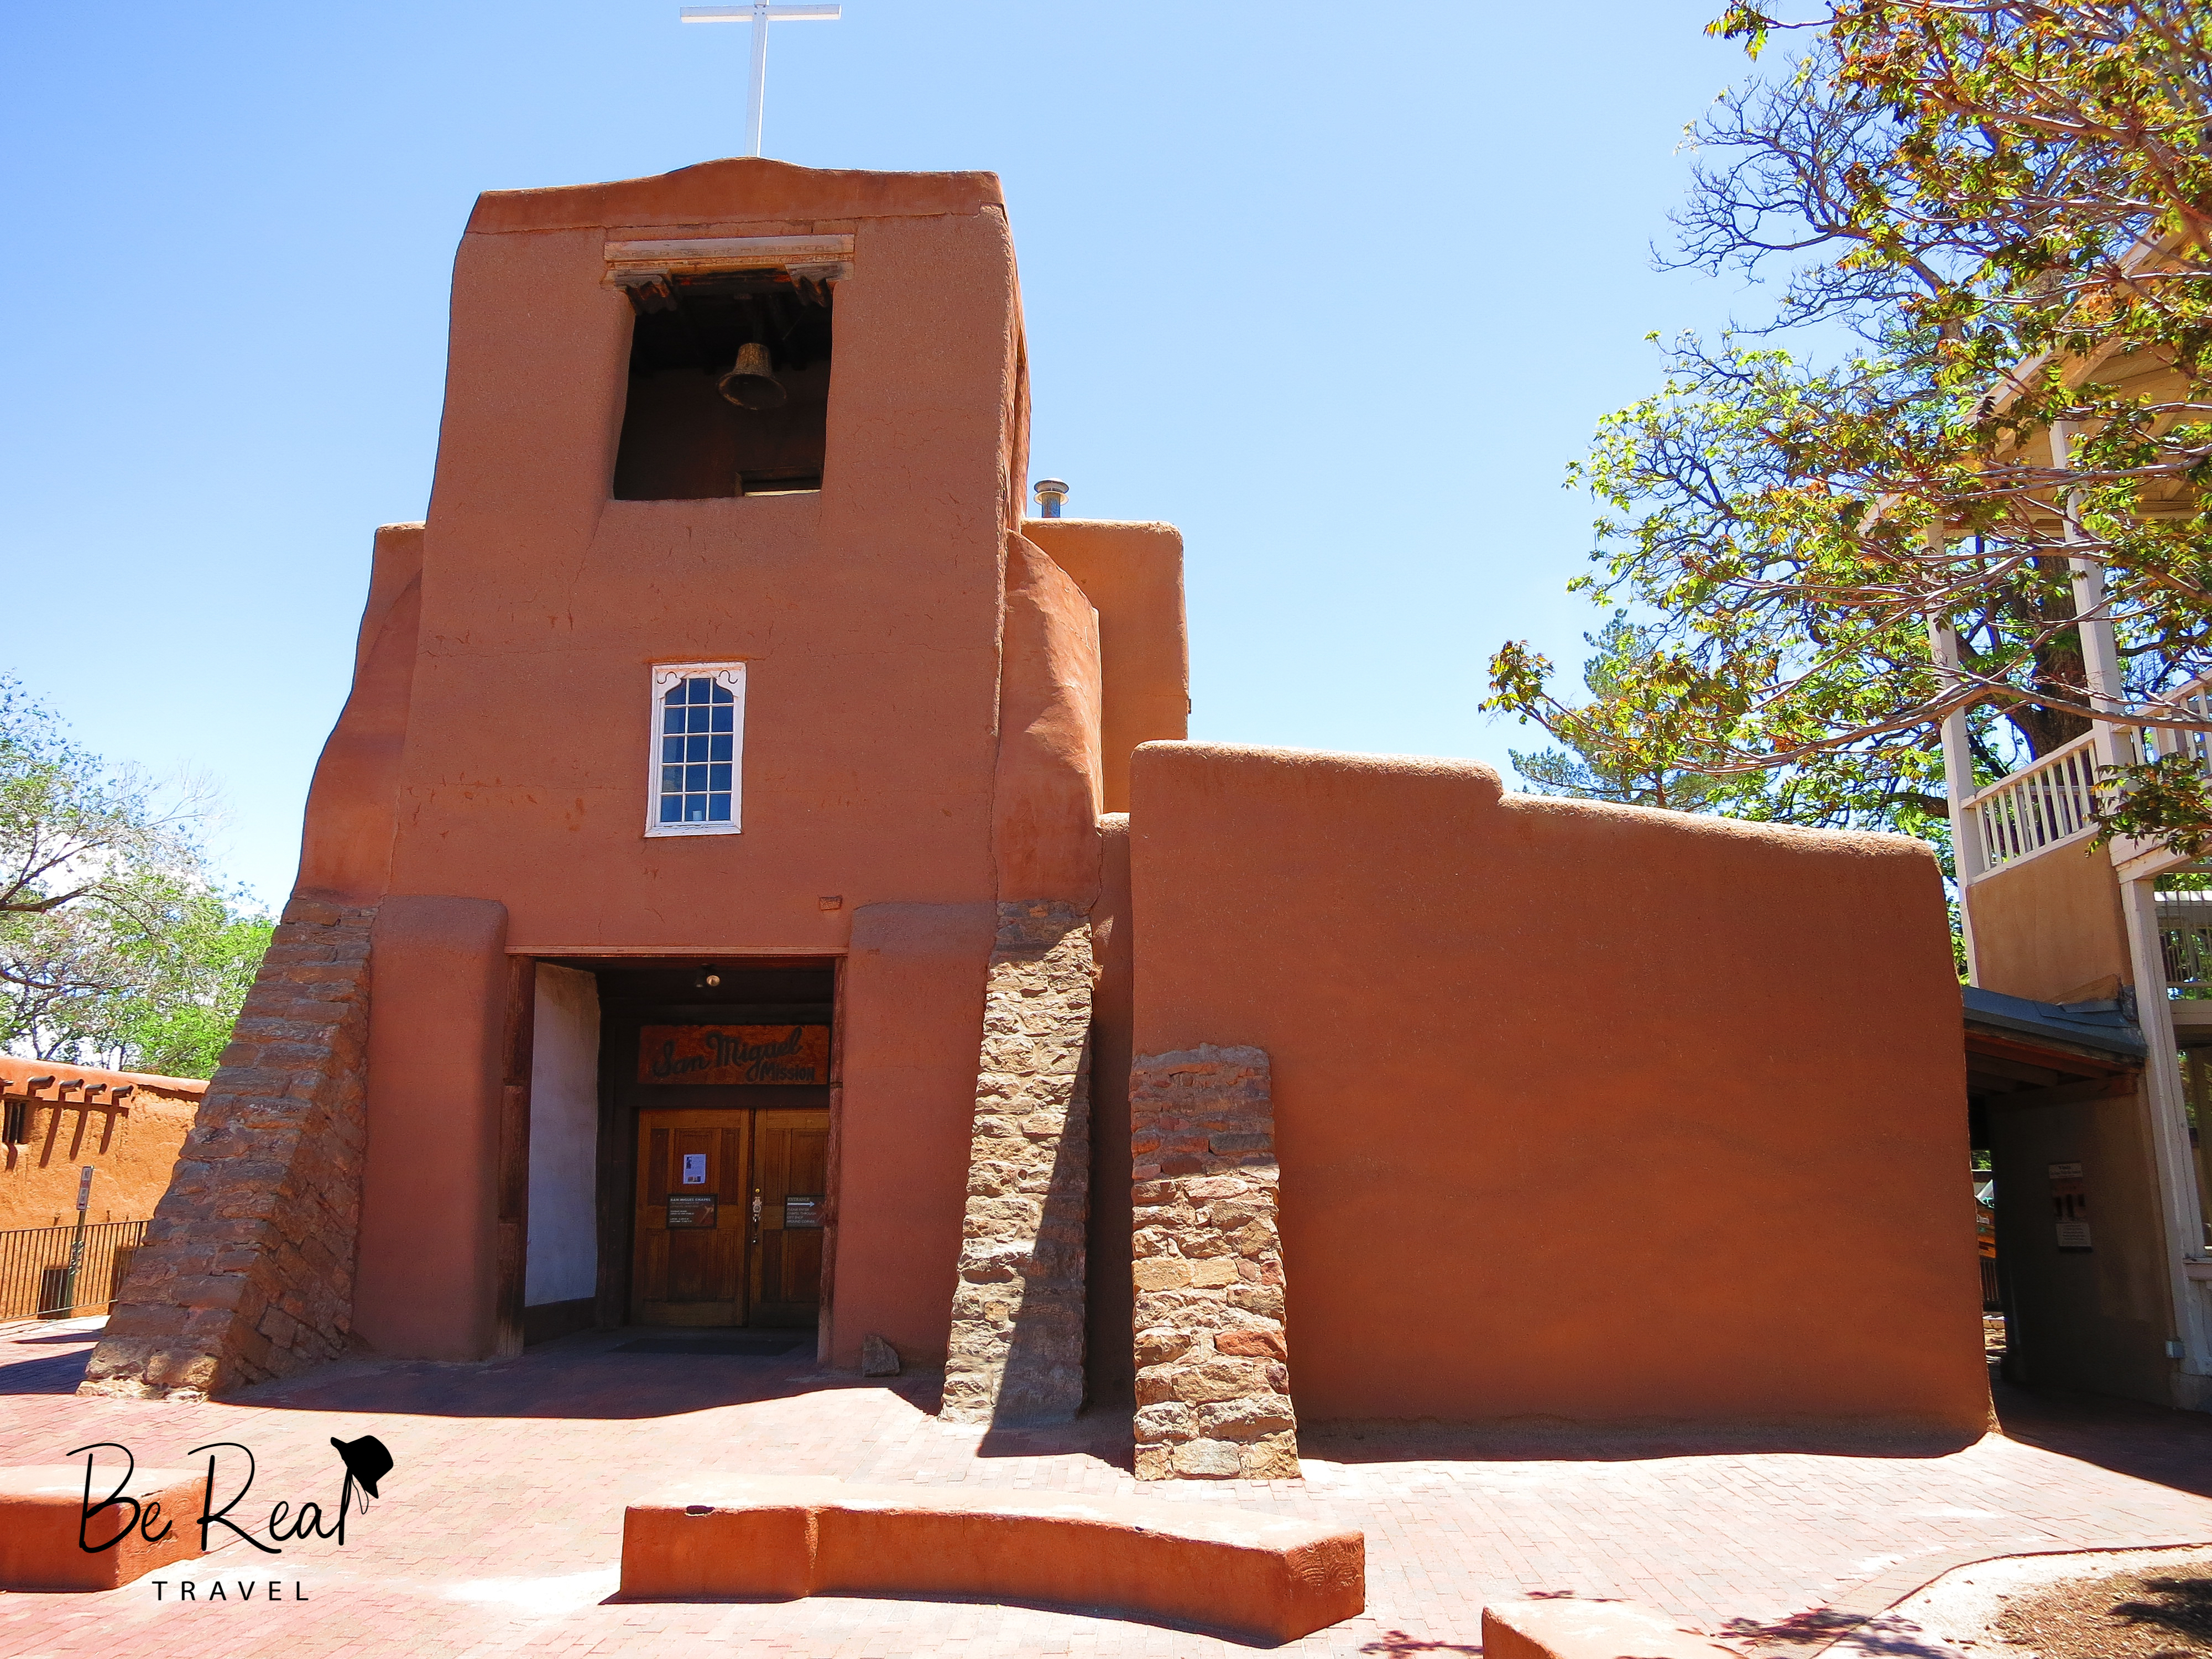 The San Miguel Mission appears to have been built with an old-school mud-based architecture style in Santa Fe, New Mexico